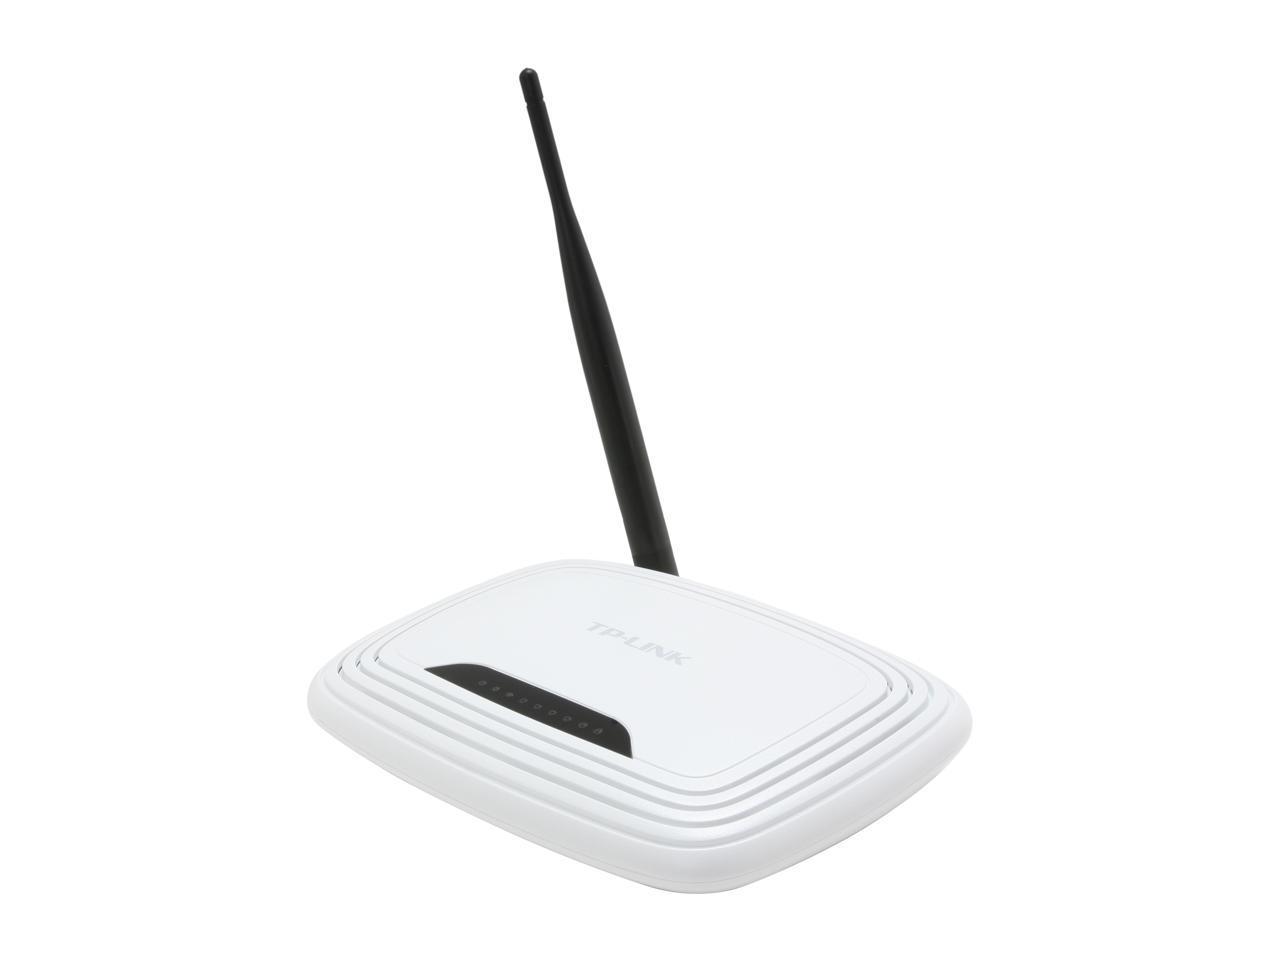 Ver 13 IP QoS WPS Button N300 300Mbps Wireless Home Router TP-Link TL-WR841N 